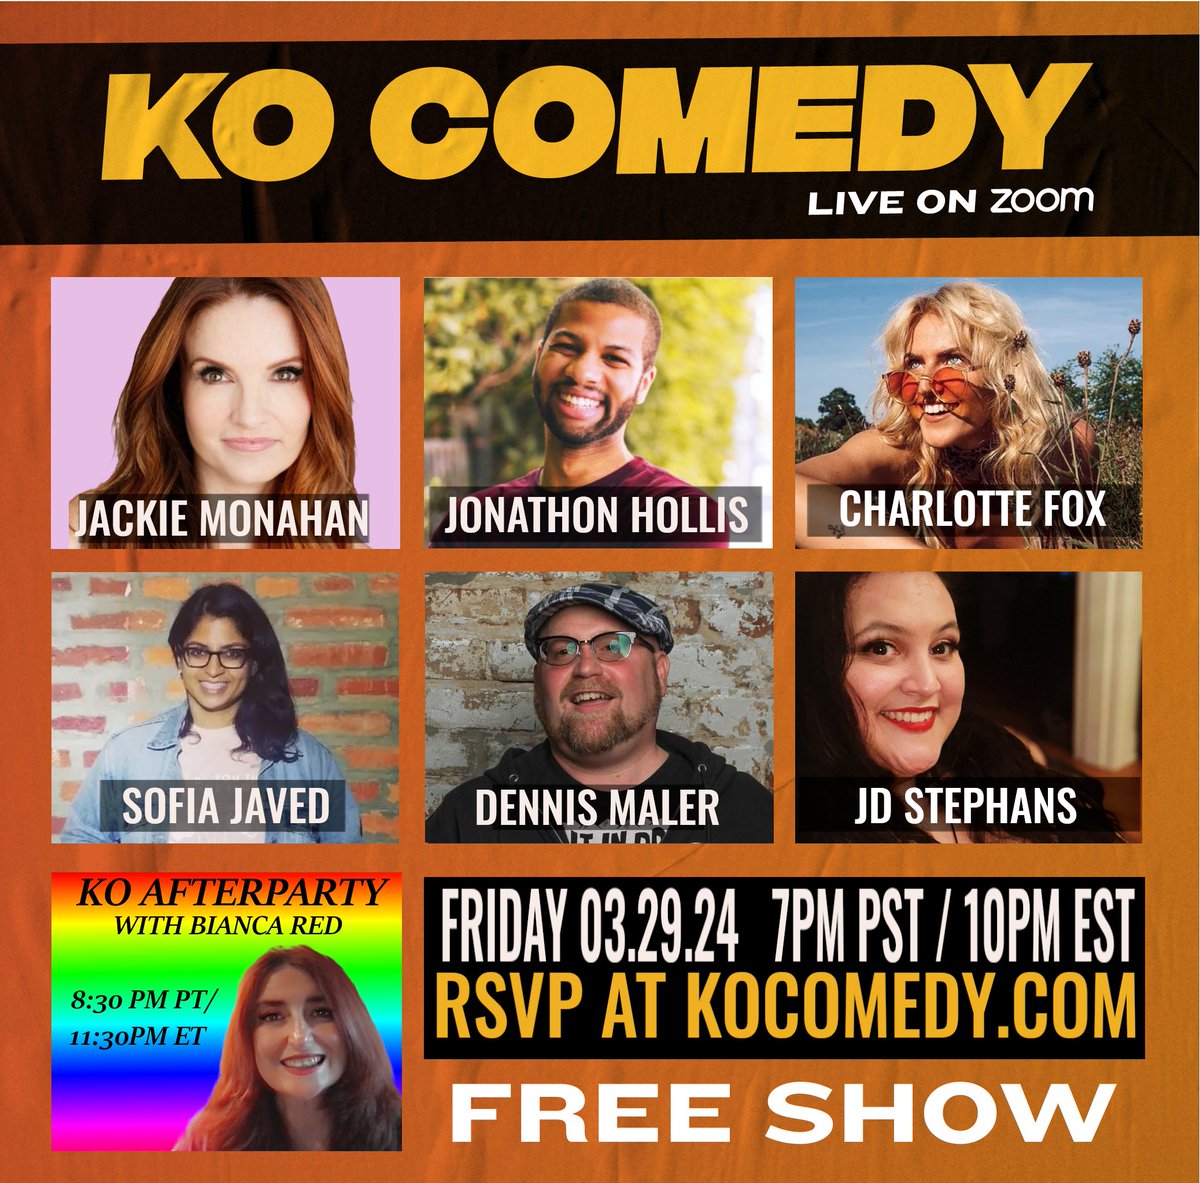 Happy Friday! We've got a great show for you tonight. Hangout with Bianca Redd when the show ends for KO Afterparty! Get your free Zoom link at KOComedy.com or watch on Twitch with @comedyhublive #KO #Friday #Afterparty #LOL